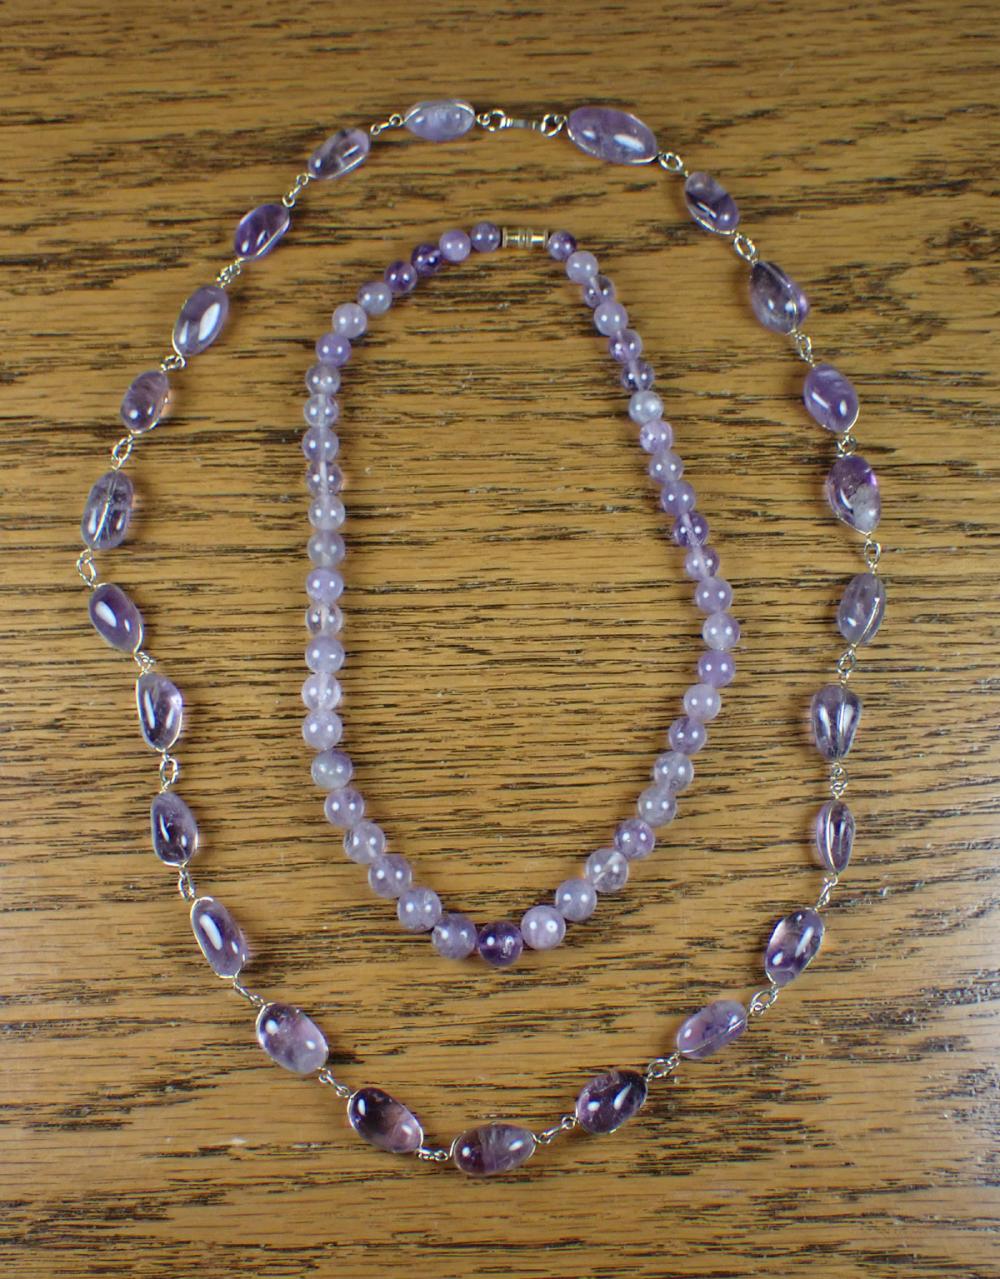 TWO AMETHYST BEAD NECKLACESTWO